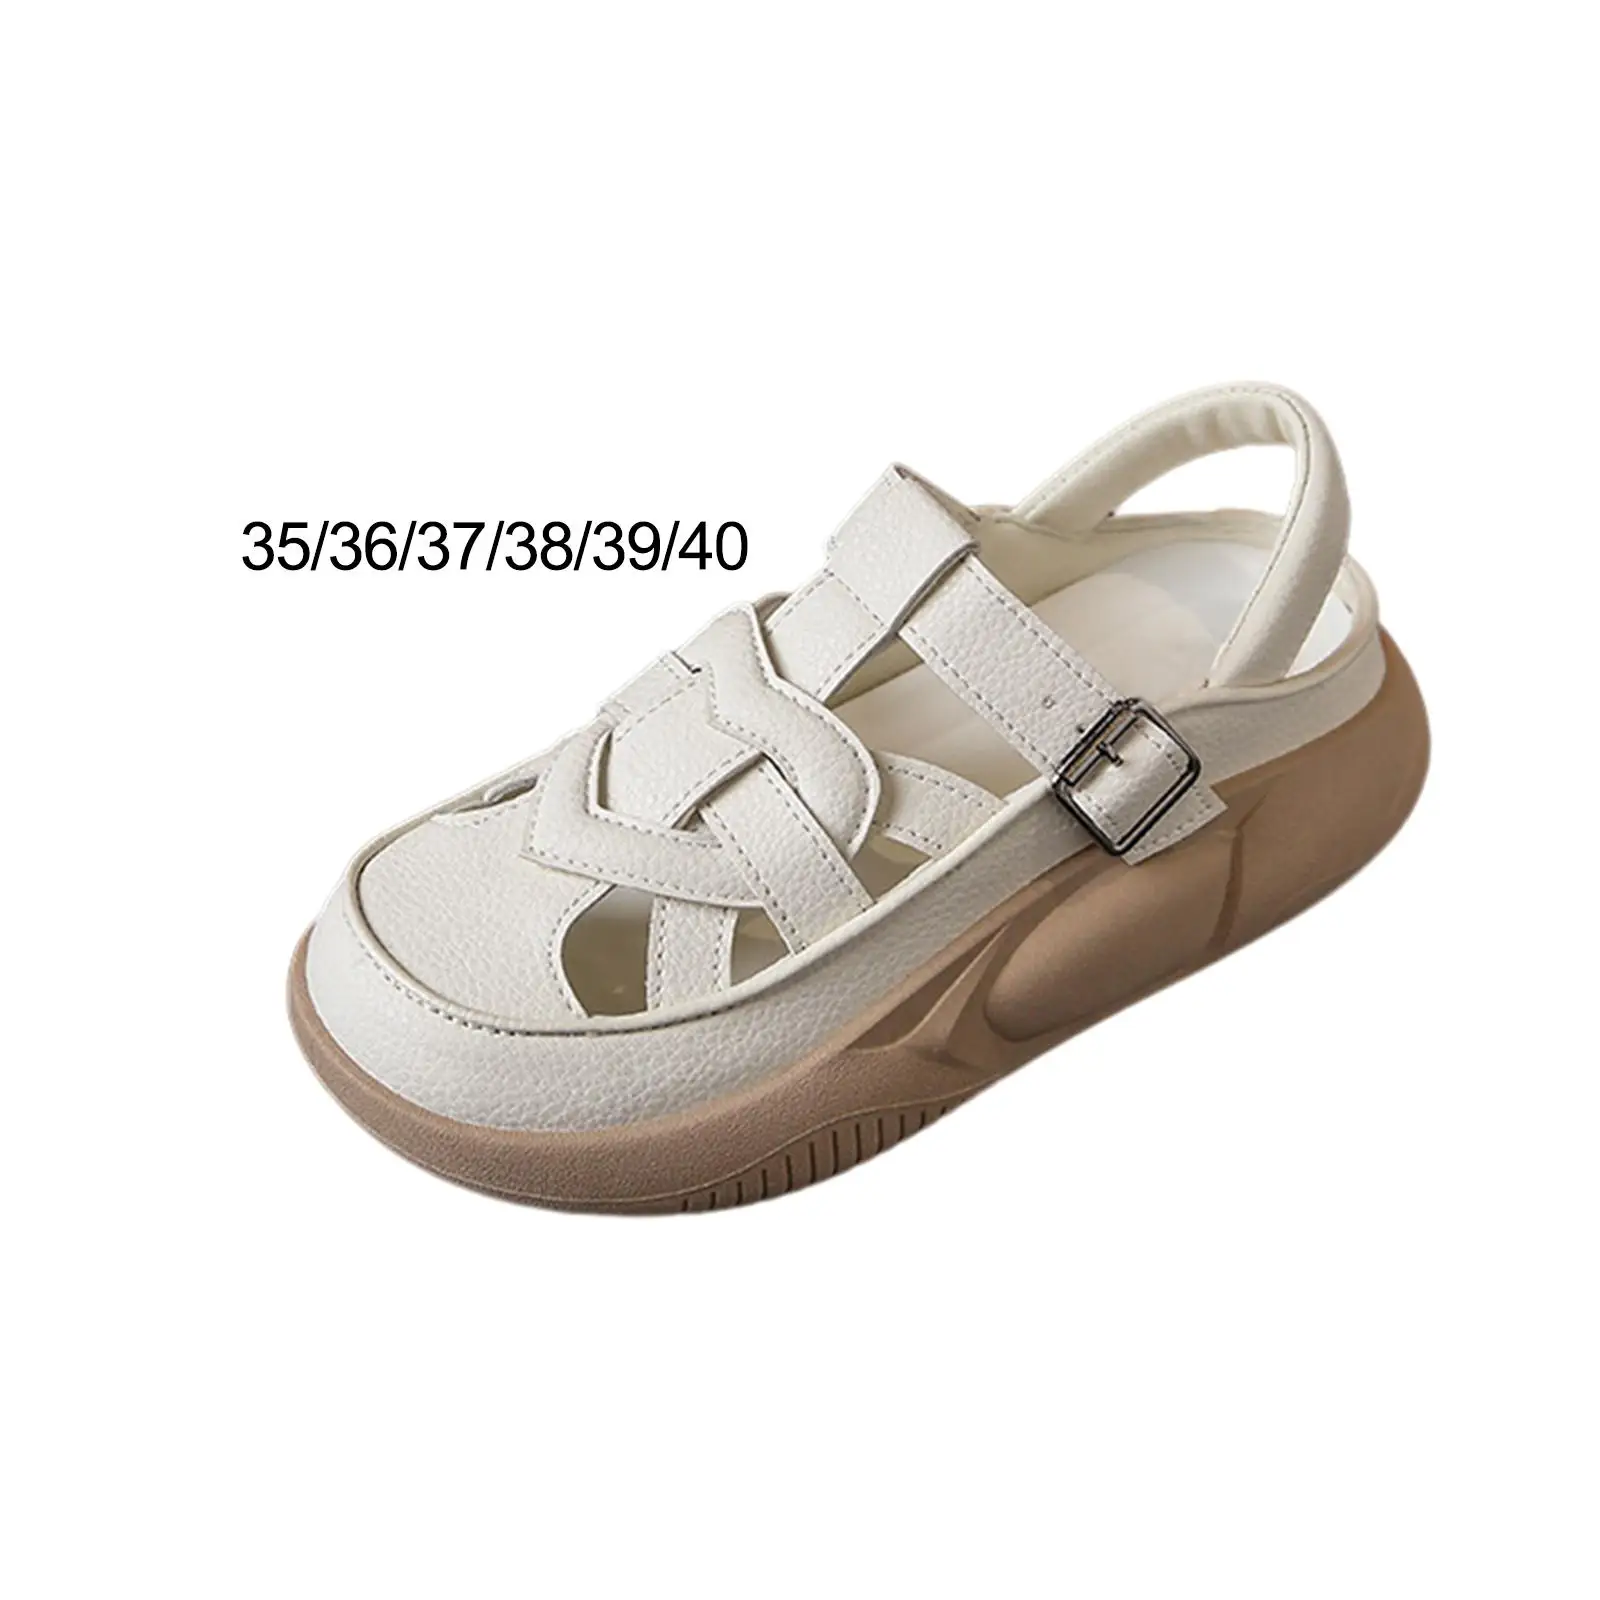 Women`s Platform Sandals Fashion Non Slip Lightweight Breathable PU Sandals for Trips Dating Walking Leisure Activities Shopping